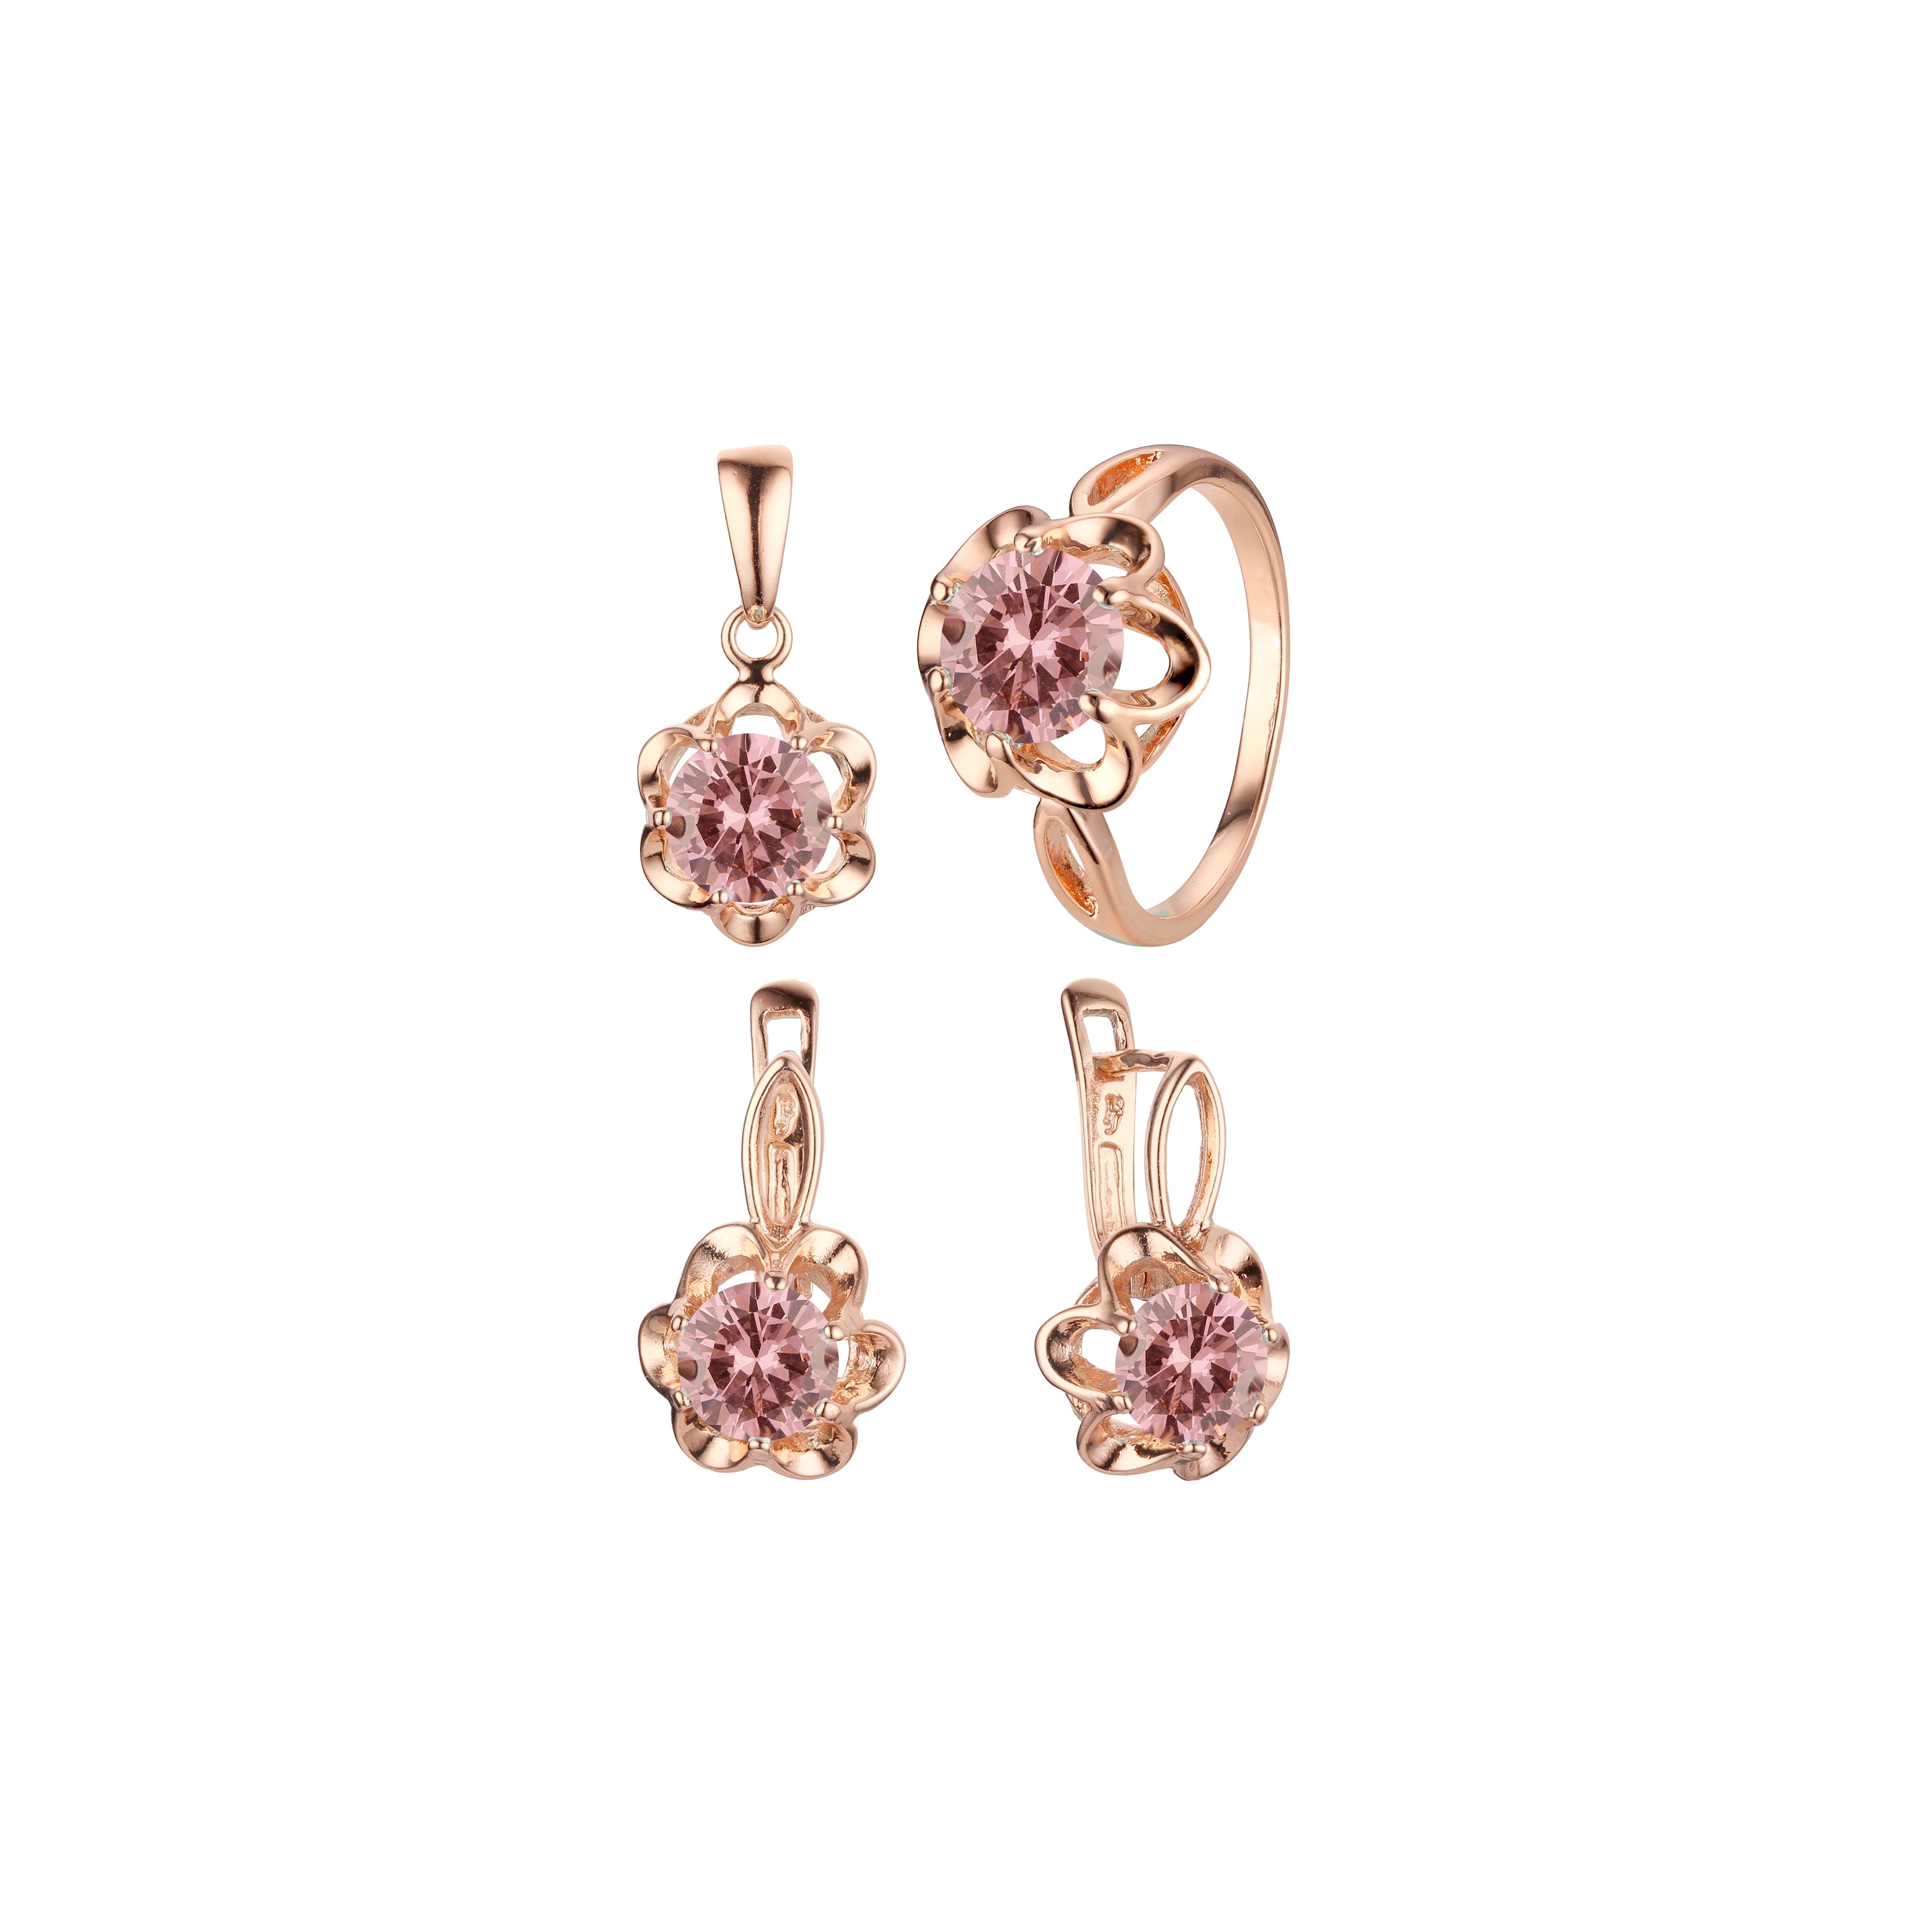 Solitaire flower big stone rings and pendant jewelry set plated in Rose Gold colors